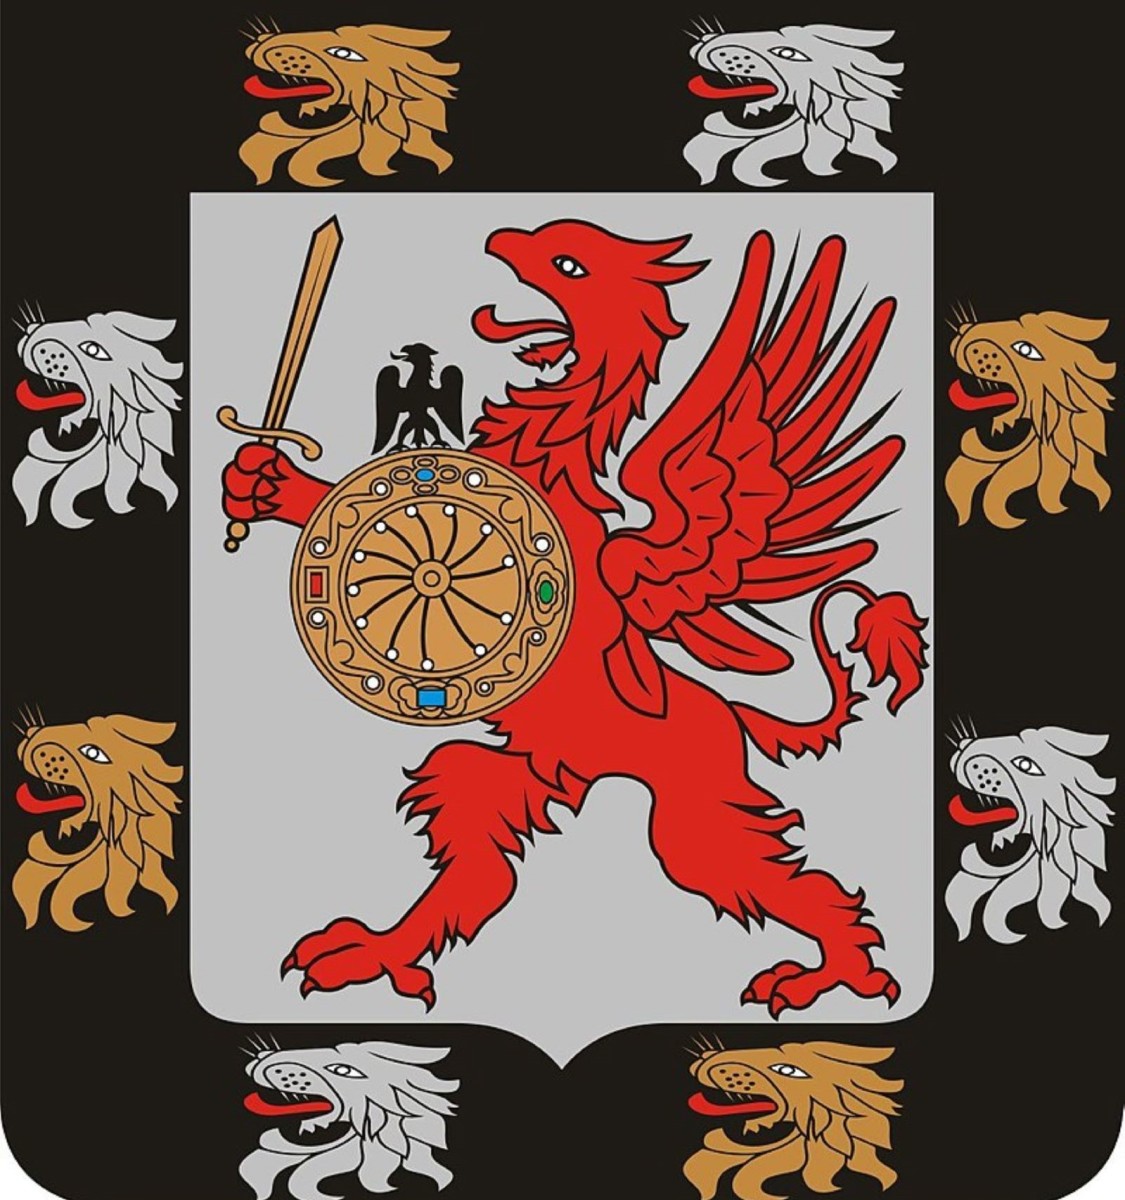 The Romanov coat of arms. 